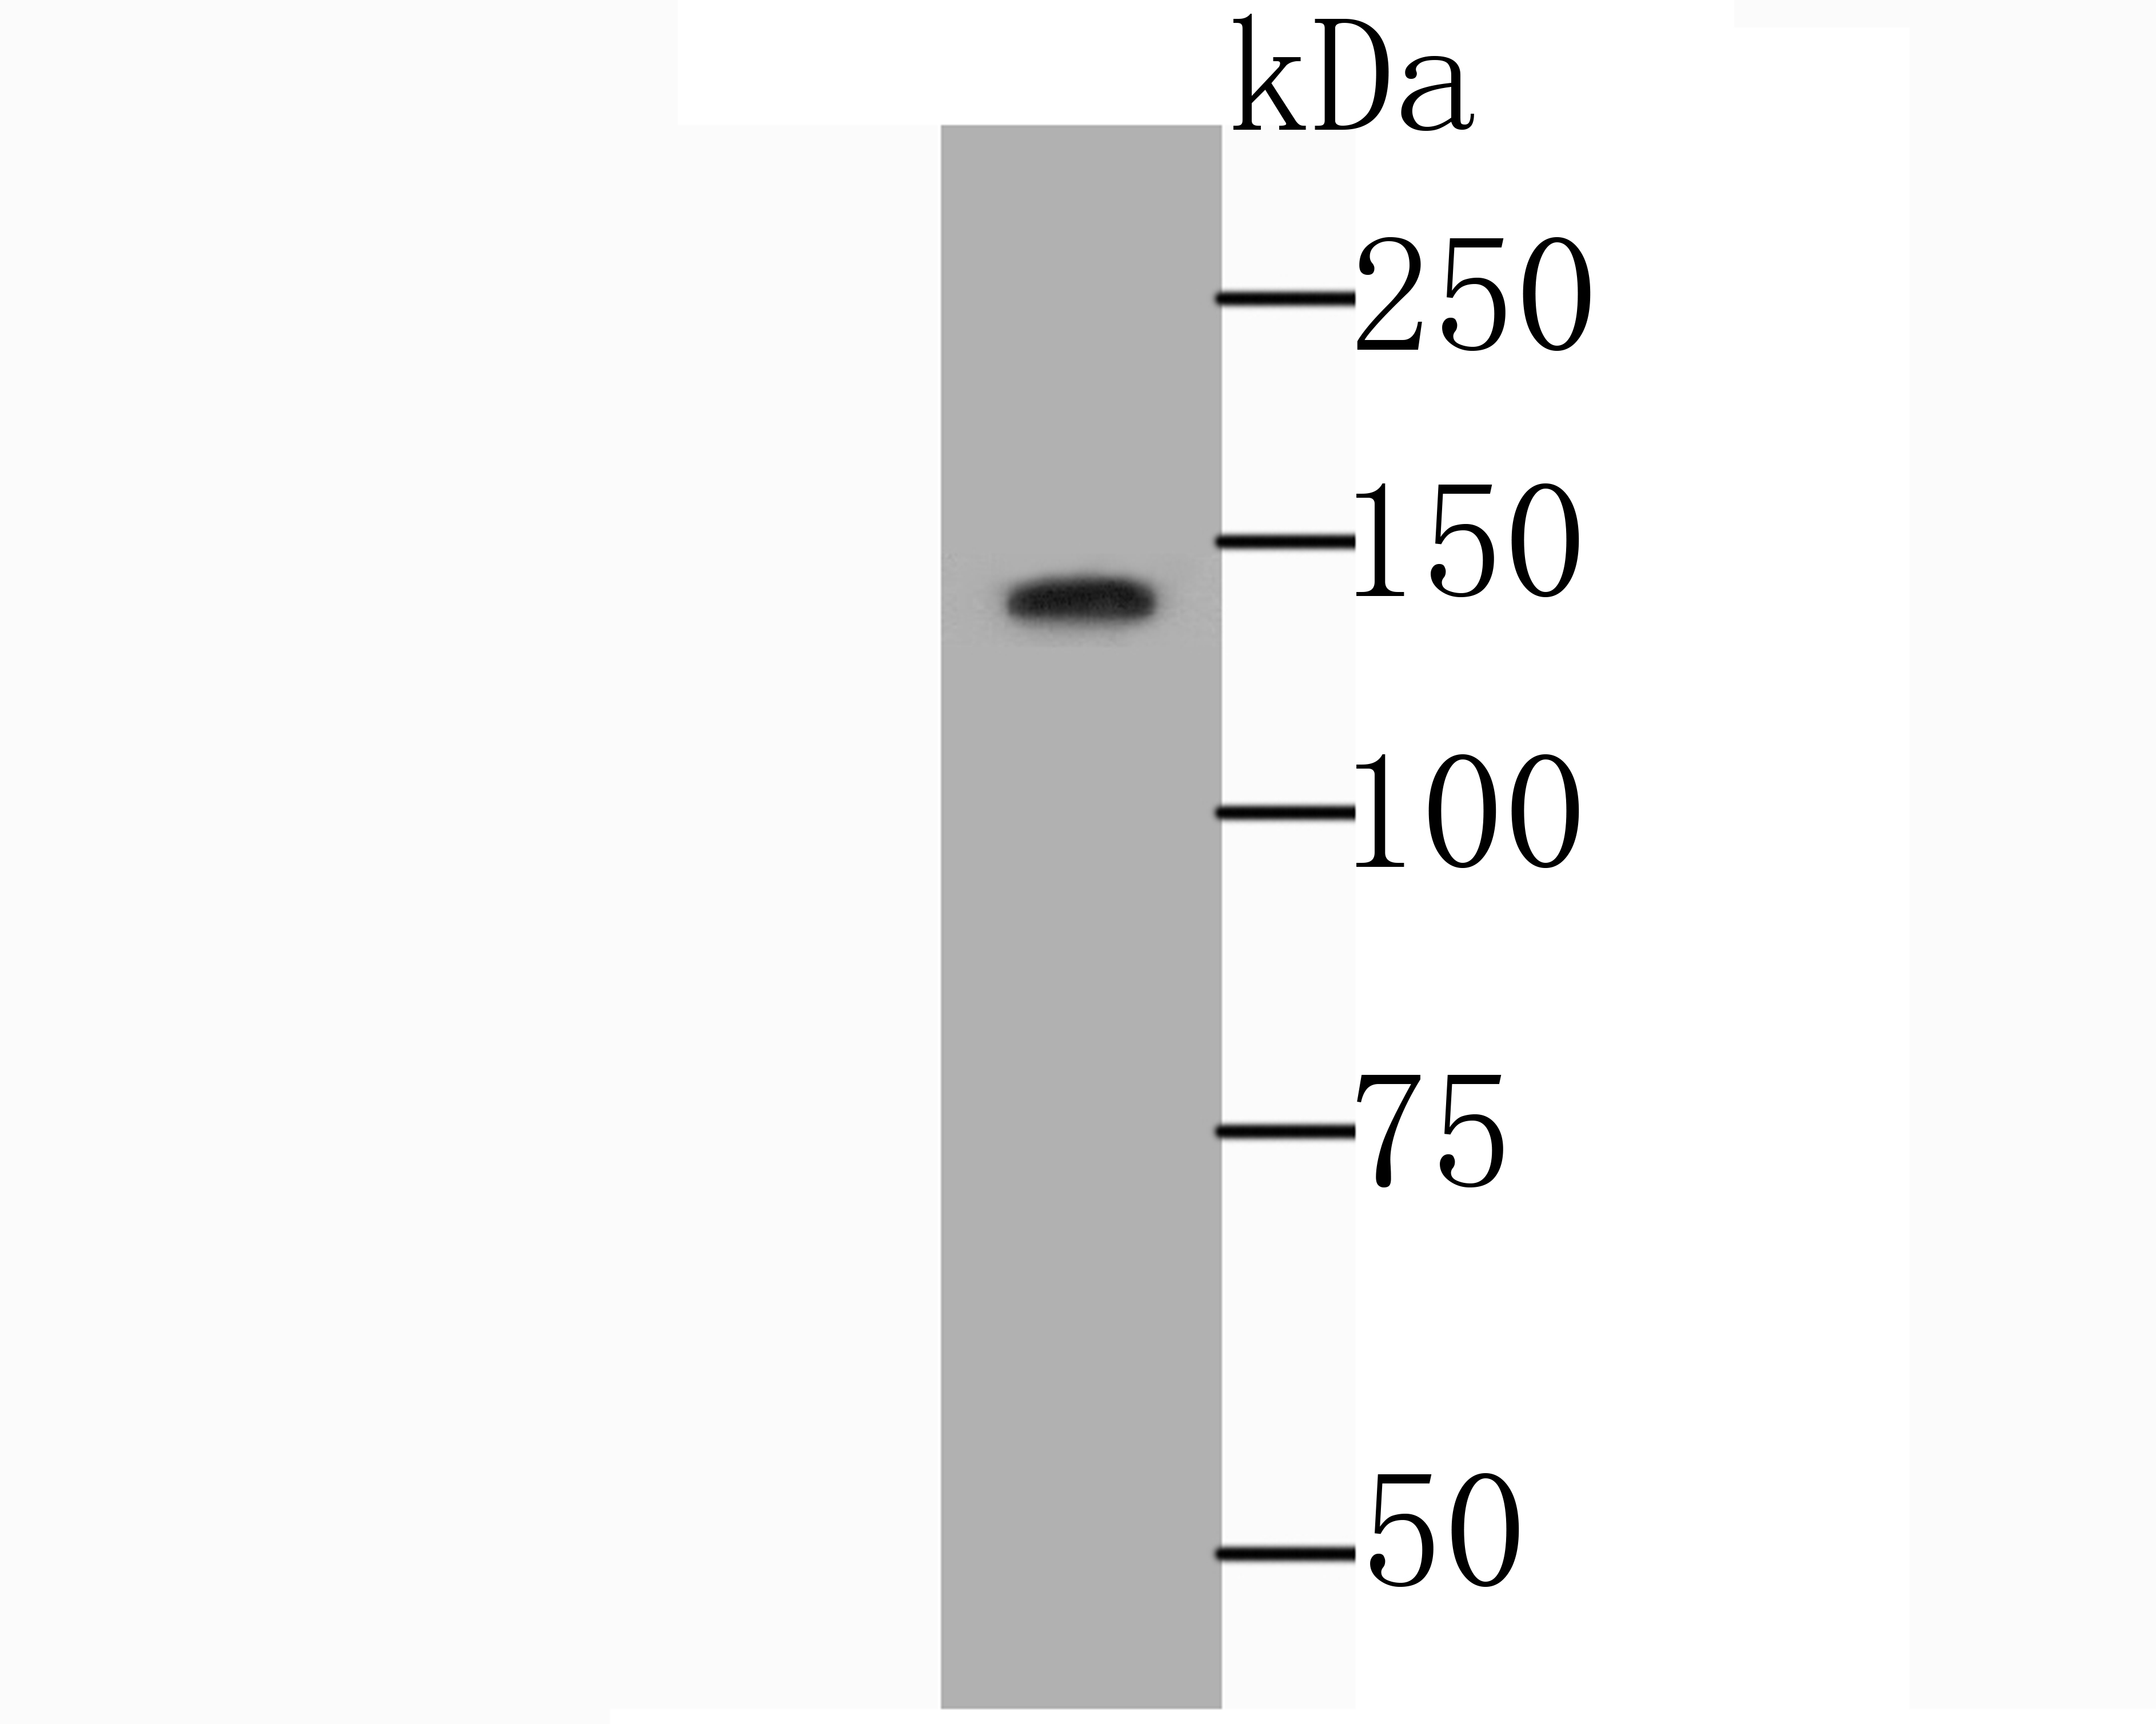 Western blot analysis of NRCAM on SH-SY5Y cell lysate using anti-NRCAM antibody at 1/1,000 dilution.